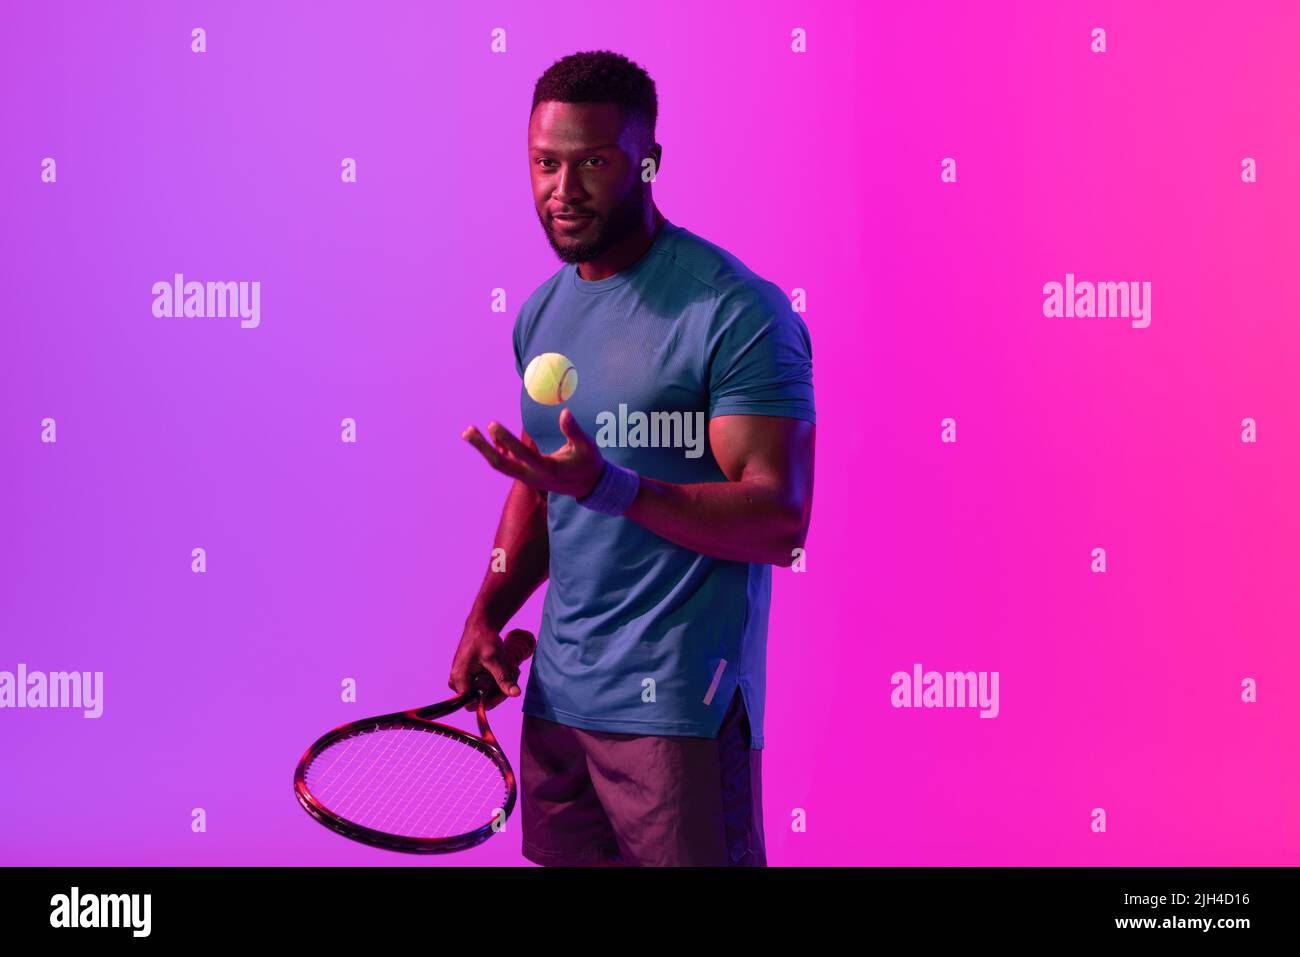 Image of african american male tennis player in violet and pink neon lighting Stock Photo